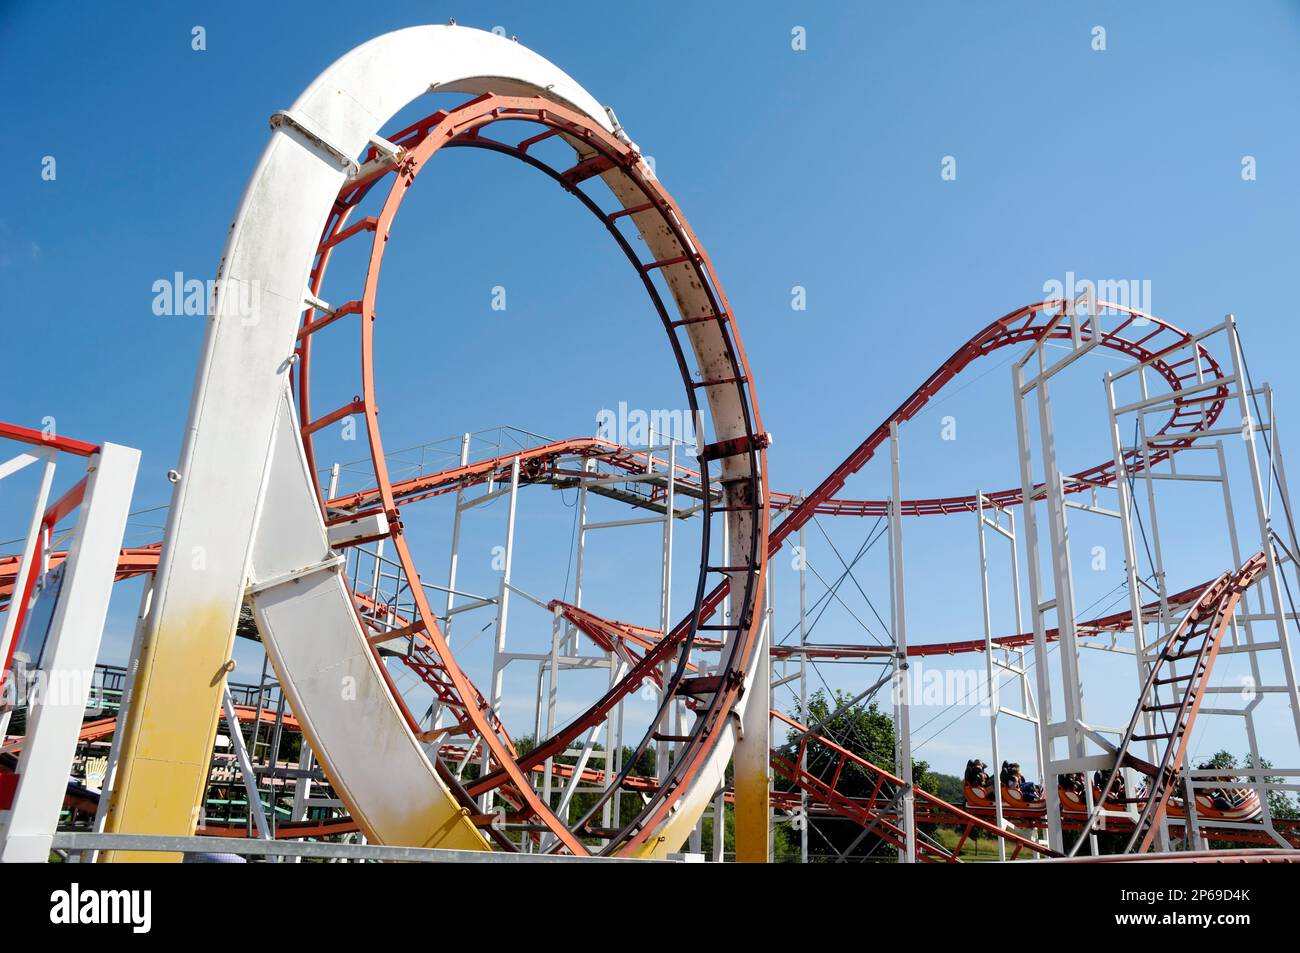 Free Images : track, adventure, amusement park, action, speed, thrill,  leisure, roller coaster, loop, amusement ride, outdoor recreation,  nonbuilding structure 2816x2112 - - 936404 - Free stock photos - PxHere